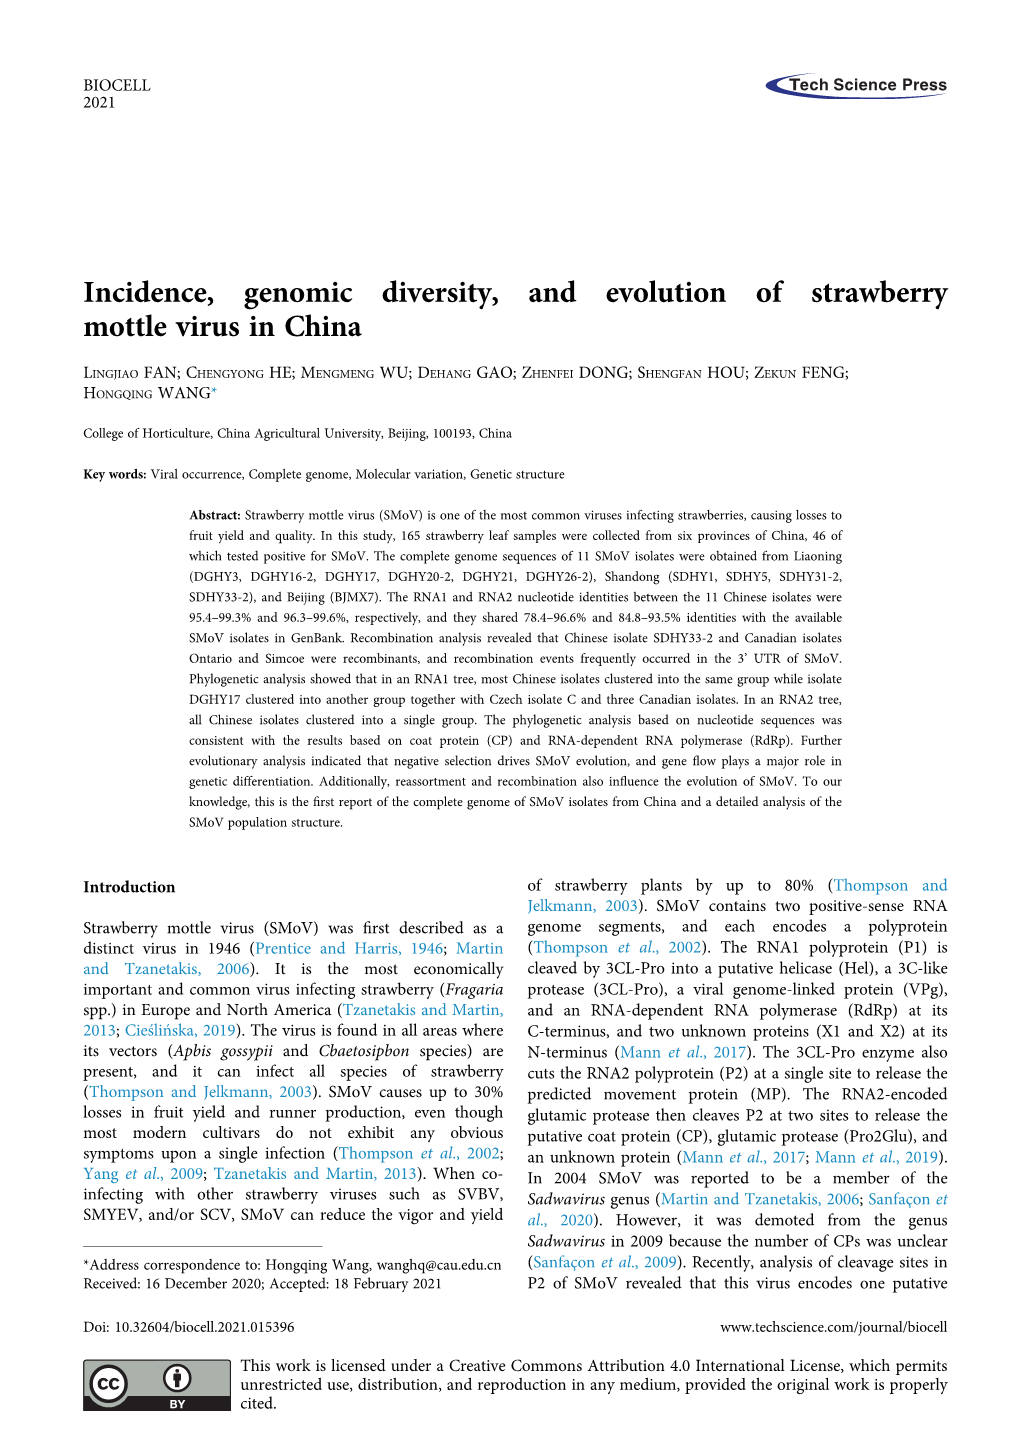 Incidence, Genomic Diversity, and Evolution of Strawberry Mottle Virus in China